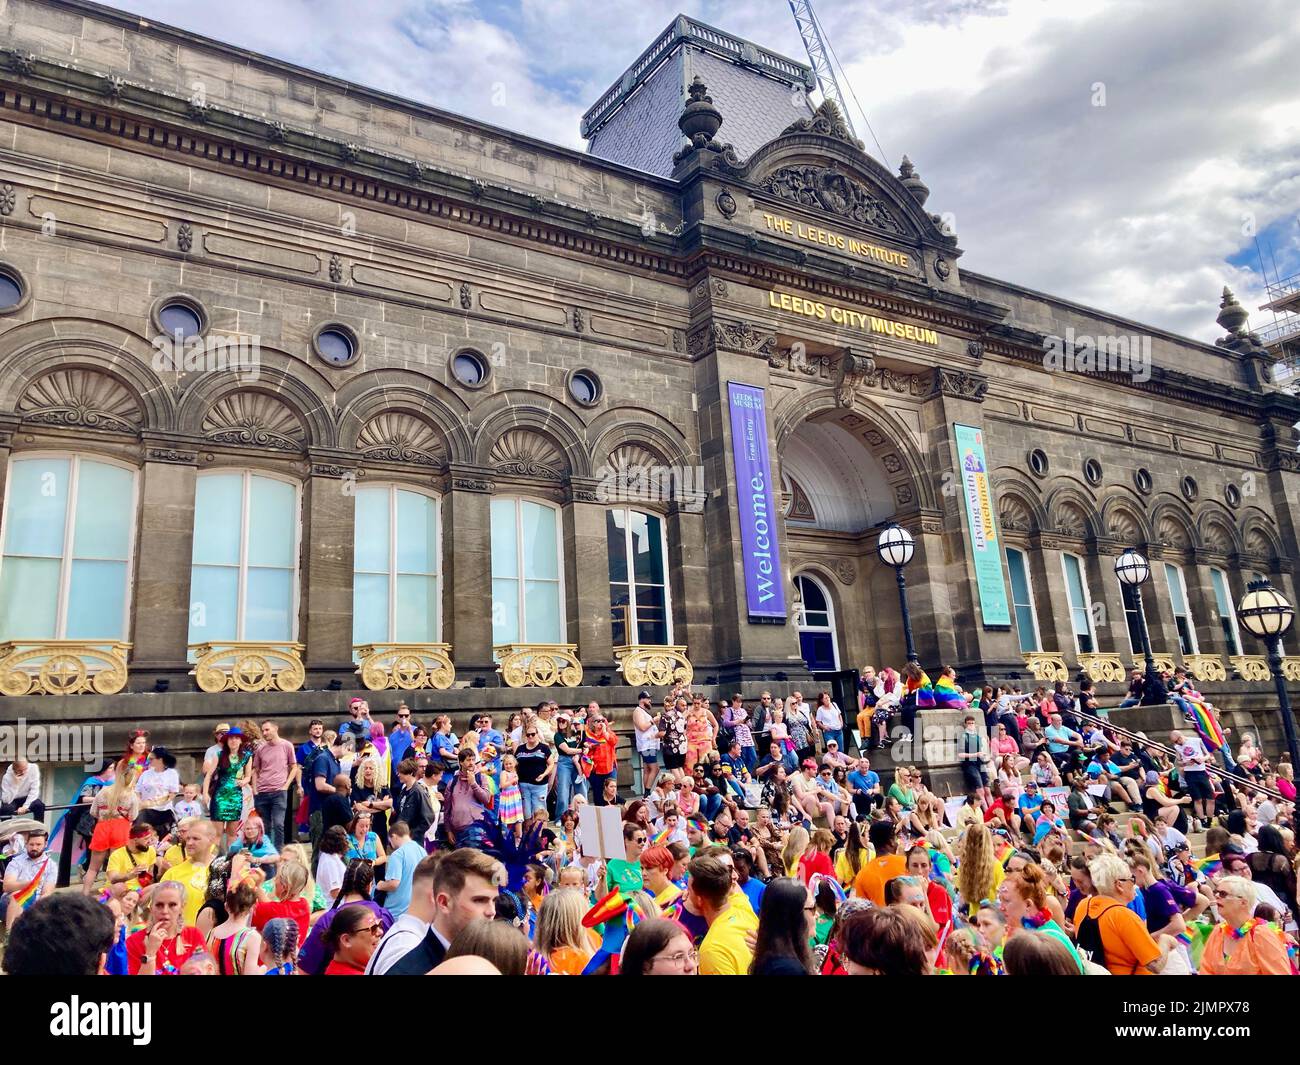 Leeds Pride 2022 celebrations as a crowd gather at Millenium Square for the beginniLeng of the parade. Celebrating gay people & wider LGBTQ community. Stock Photo